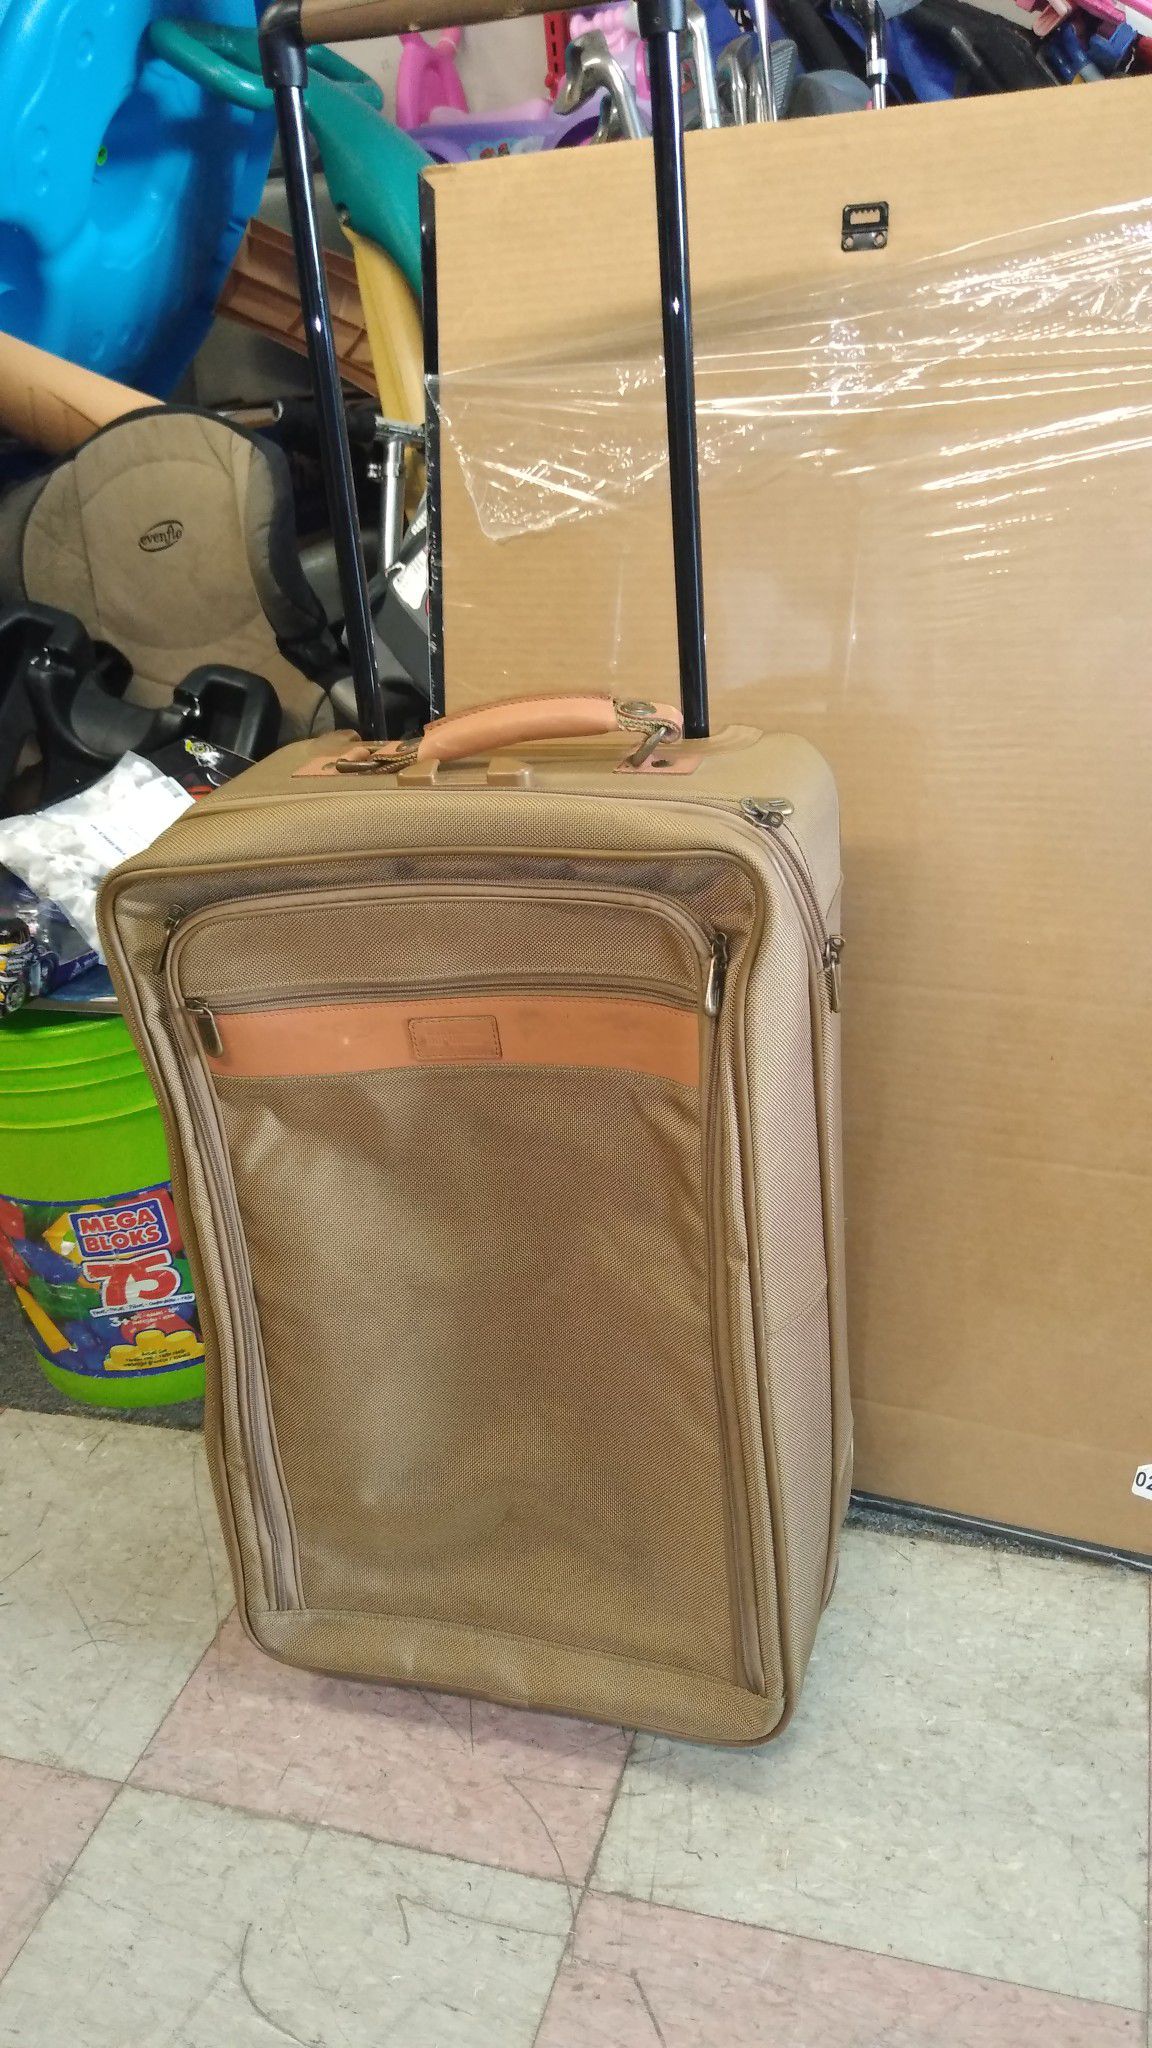 Carry on size luggage with wheels and handle